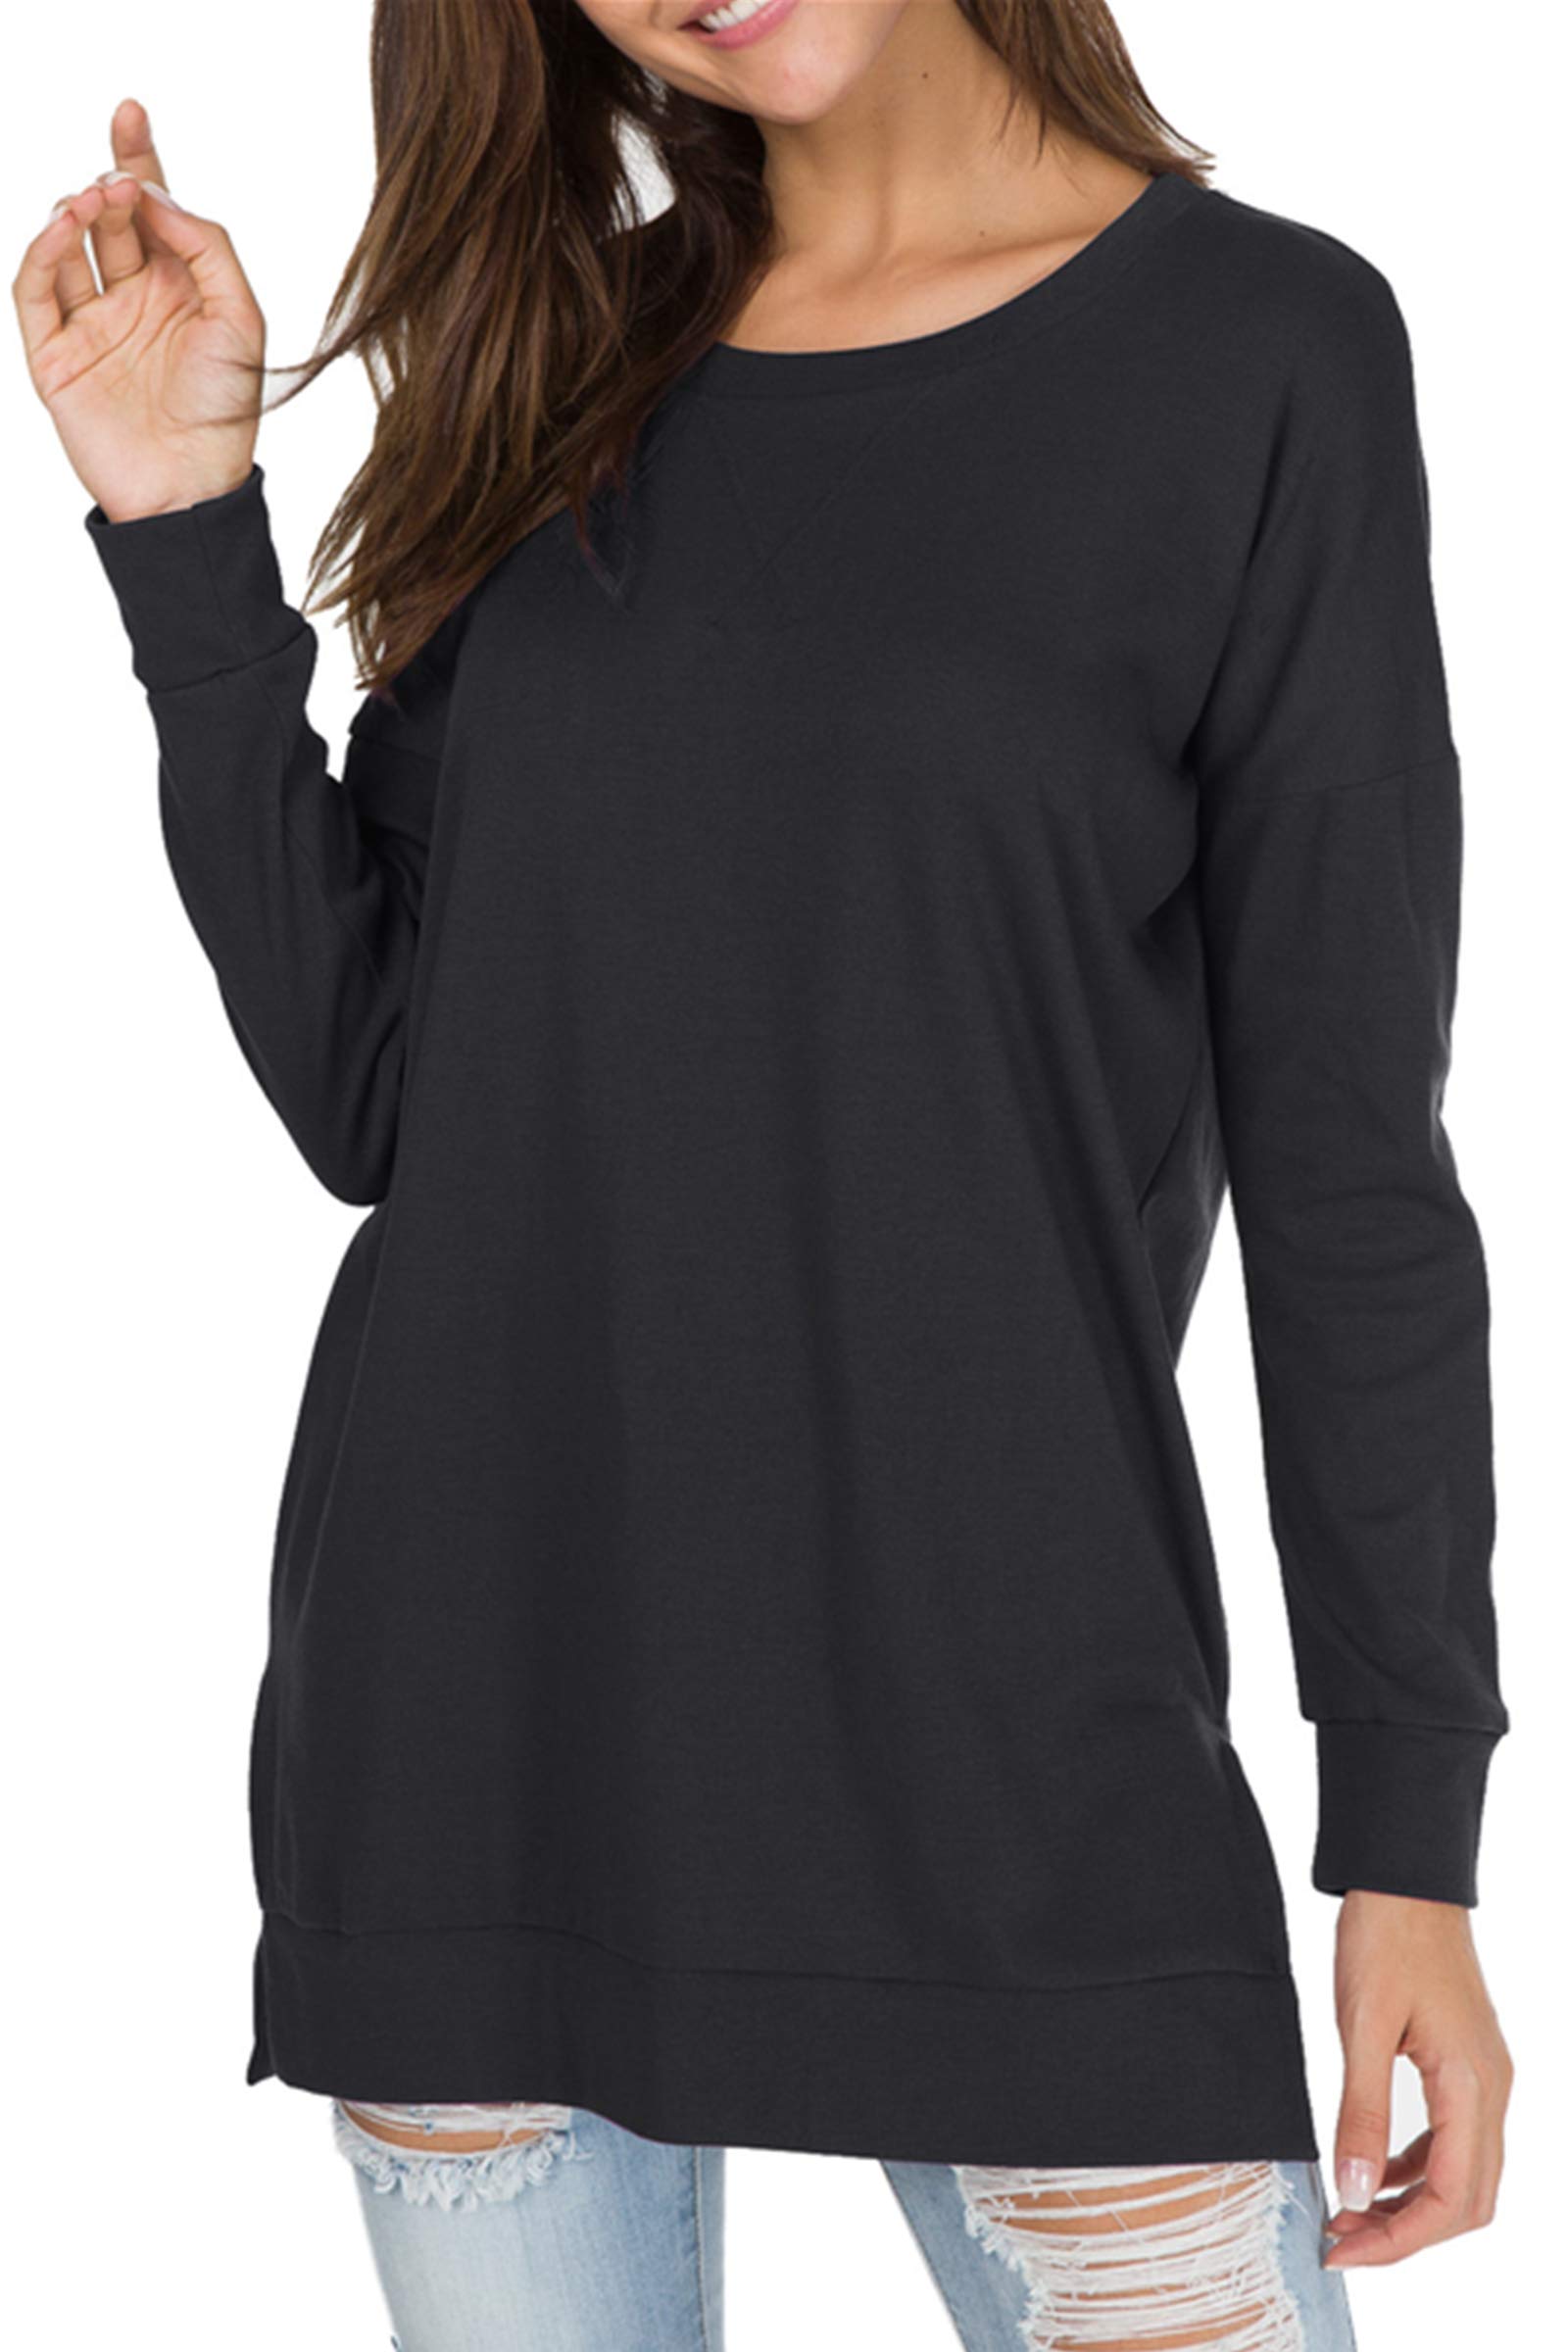 levaca Women's Fall Long Sleeve Side Split Loose Blouses Casual Pullover Tunic Tops